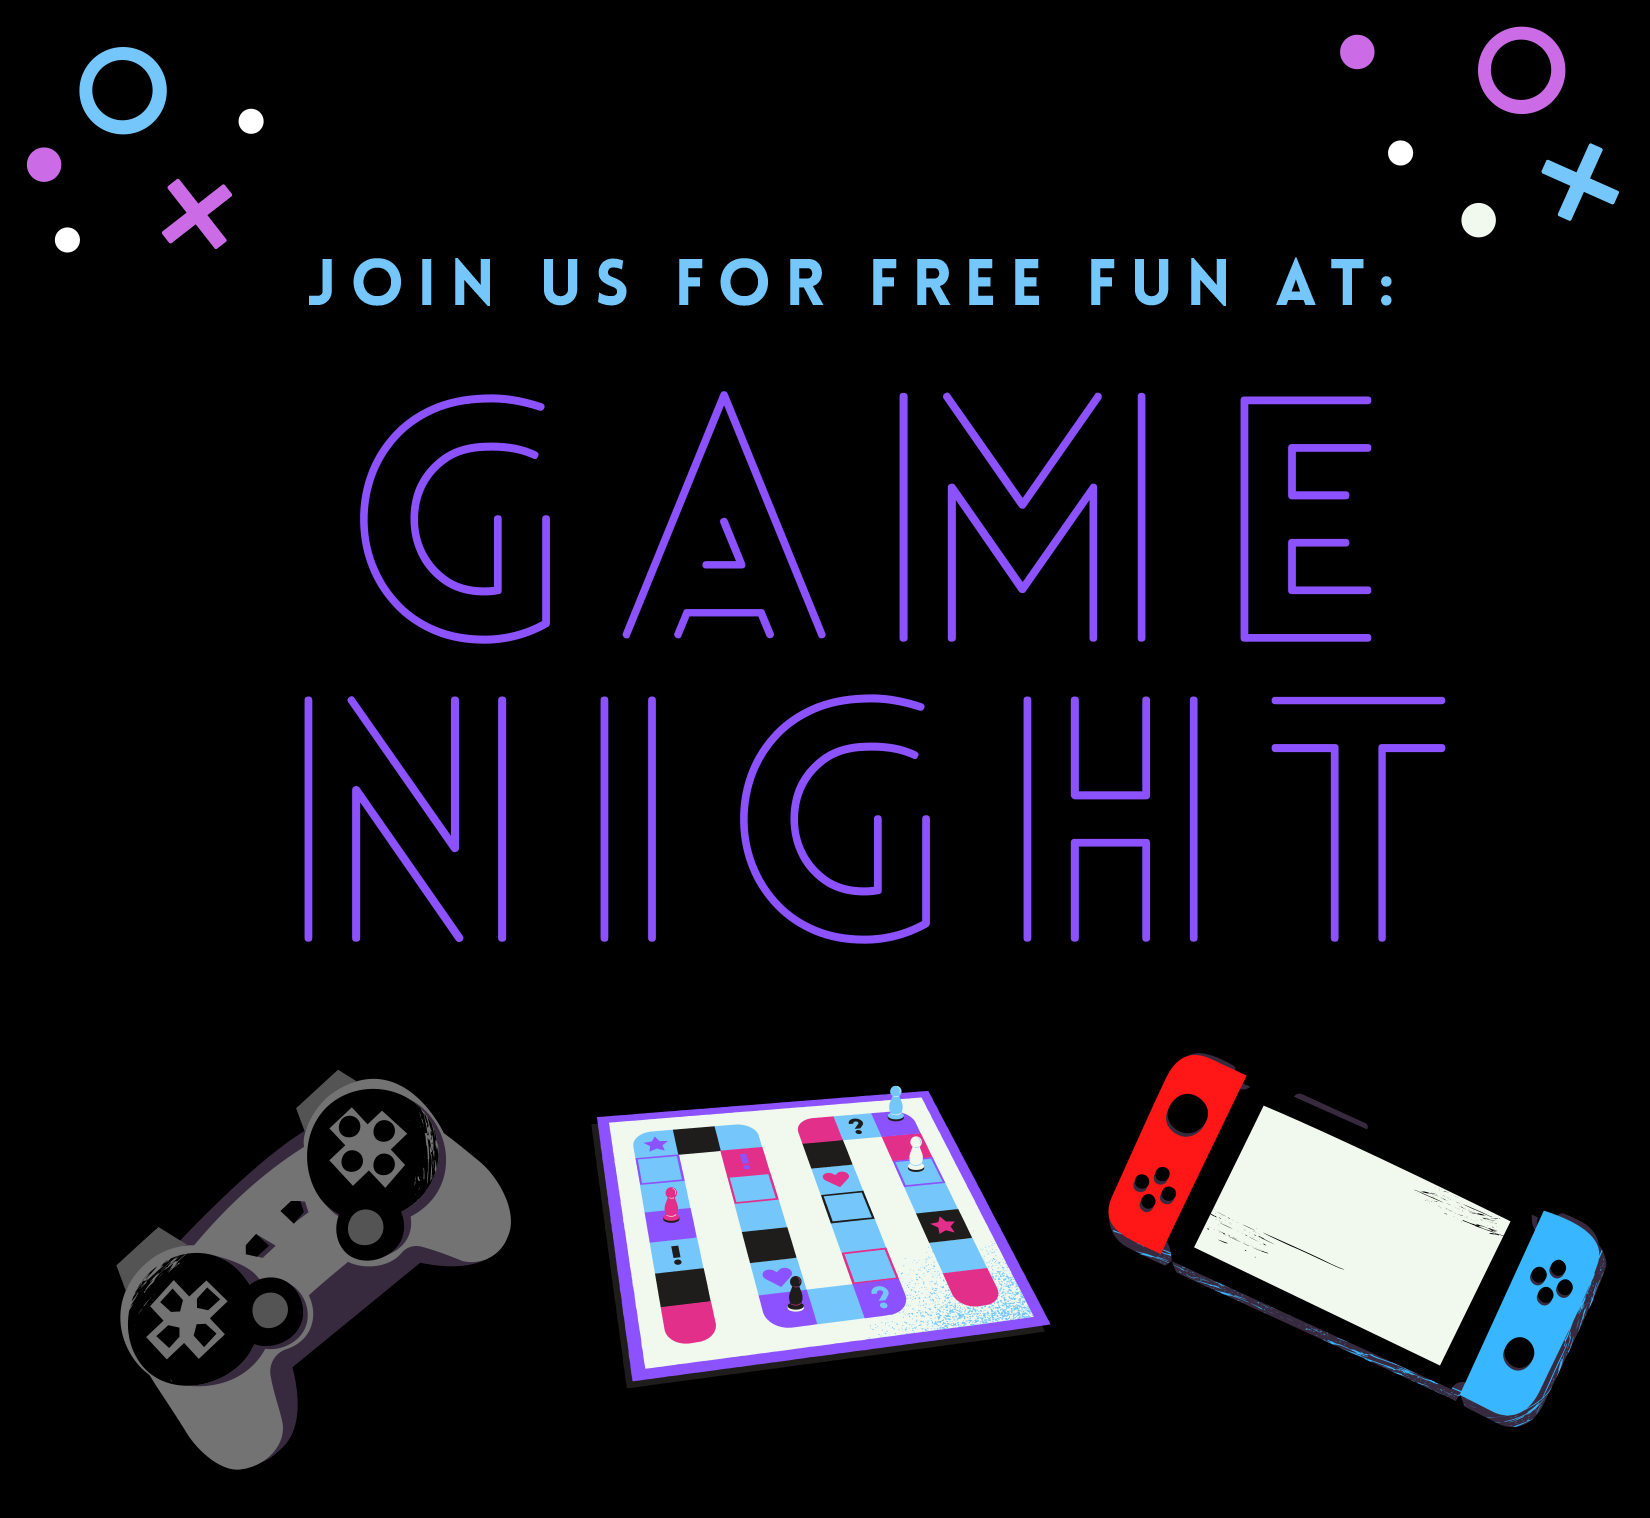 Join us for free fun at game night, in neon letters, with cartoon game controllers and game board against a black background